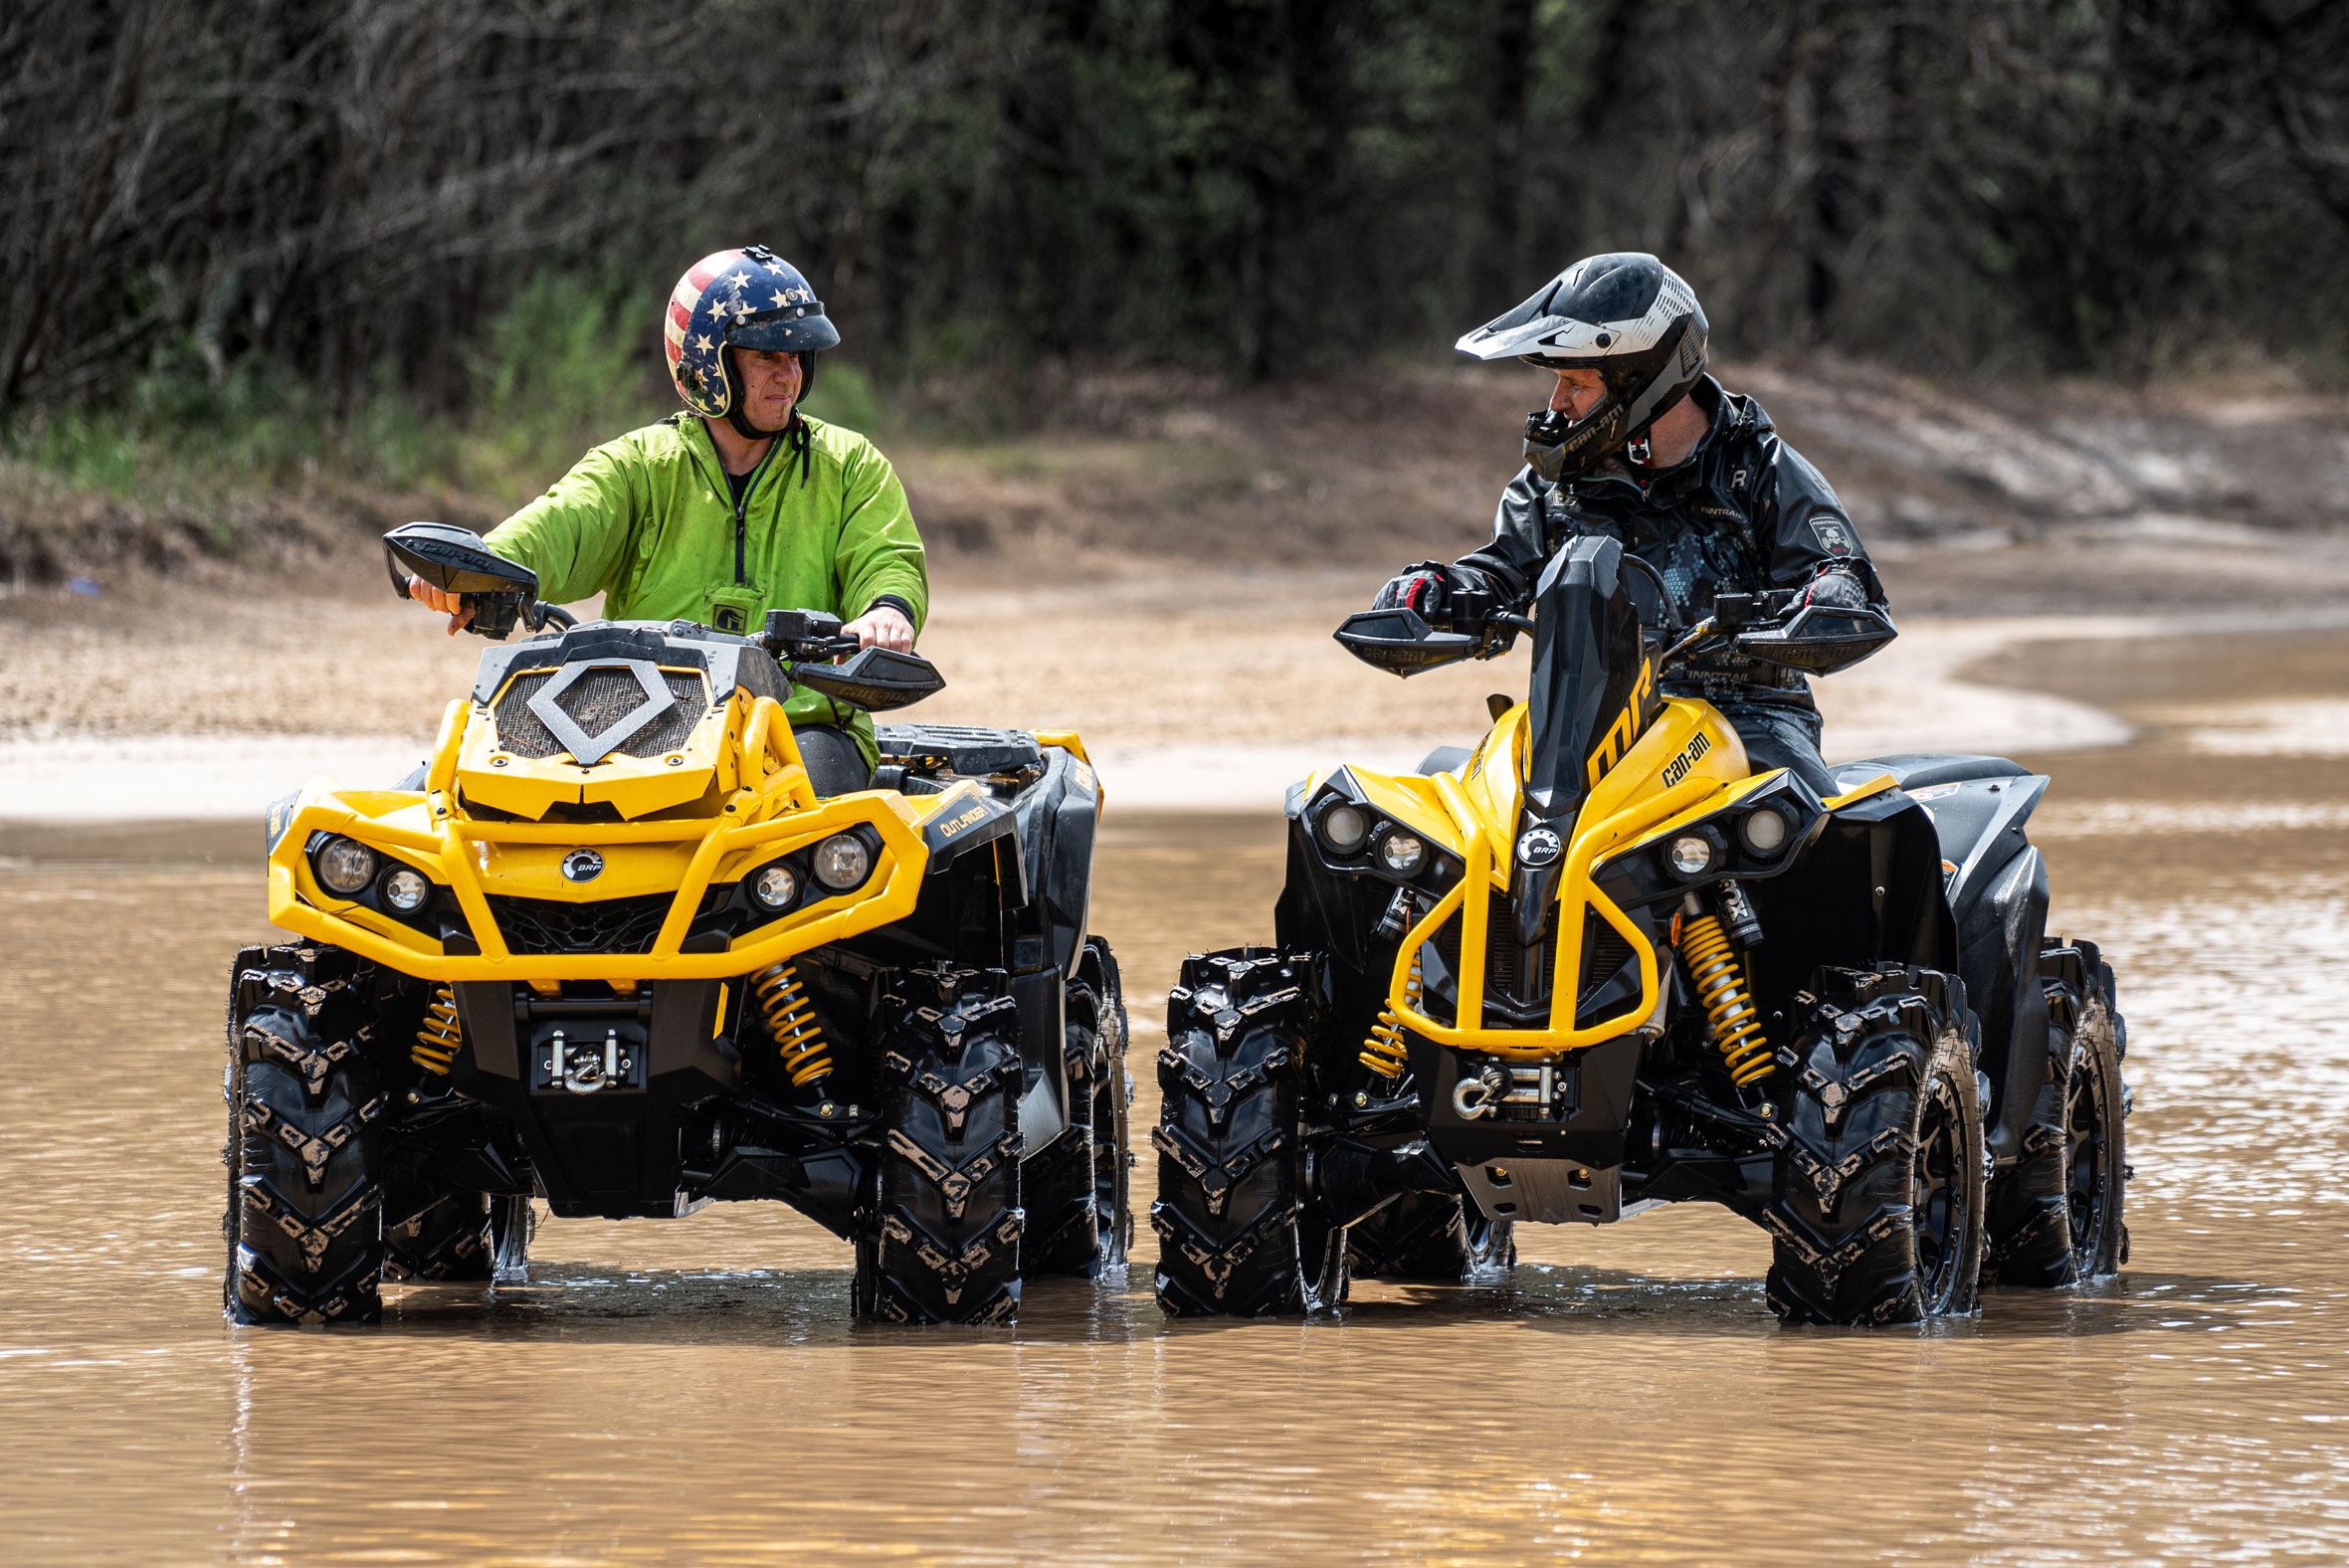 Dustin Jones on a Can-Am Outlander X mr and Ostacruiser on a Can-Am Renegade X mr